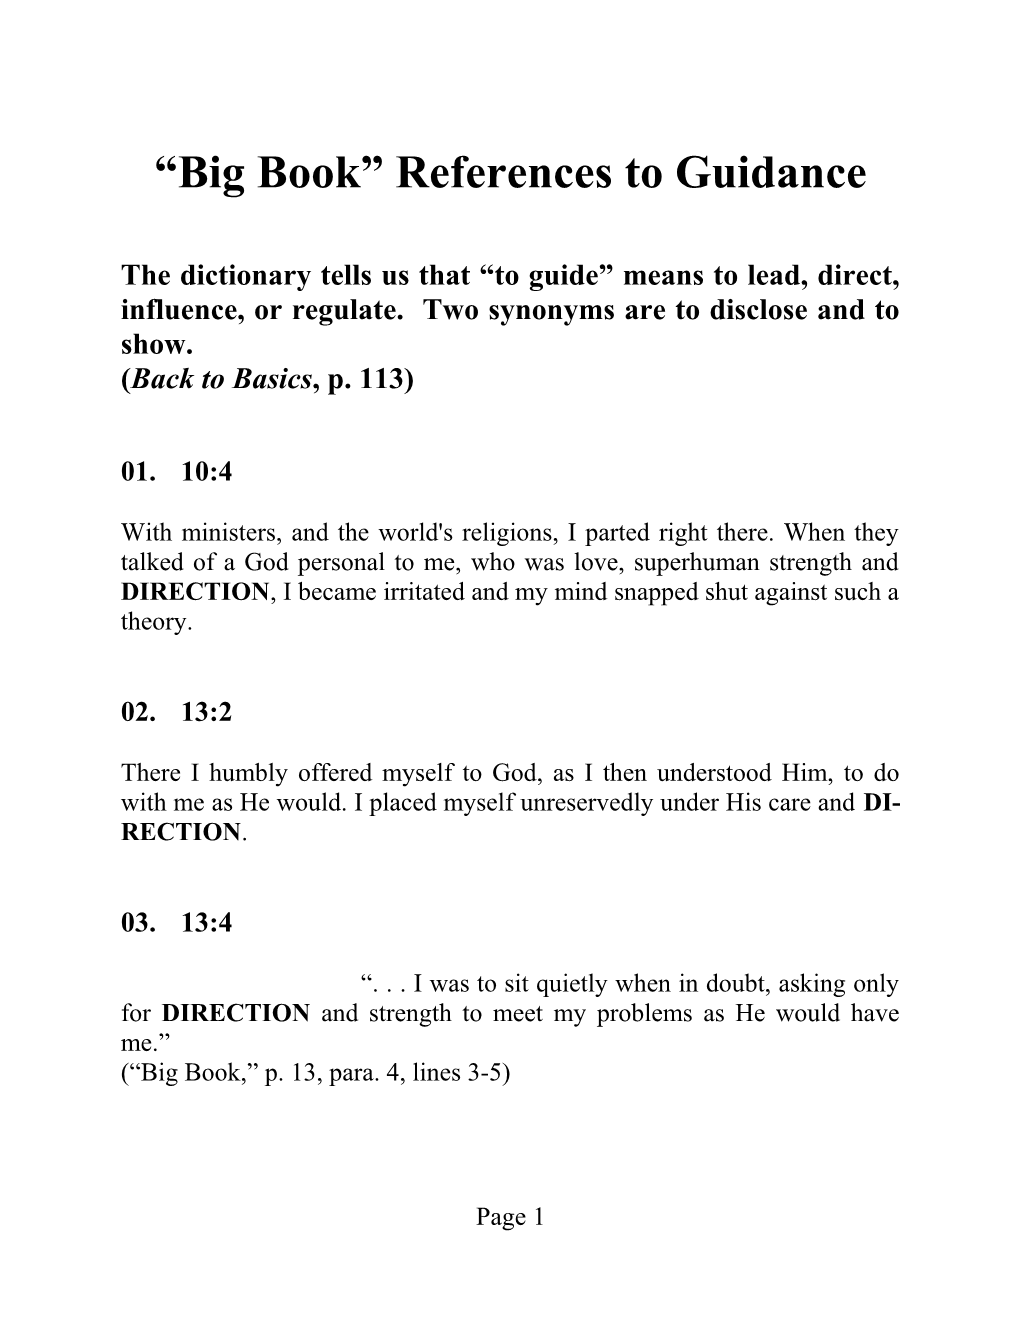 Big Book References to Guidance